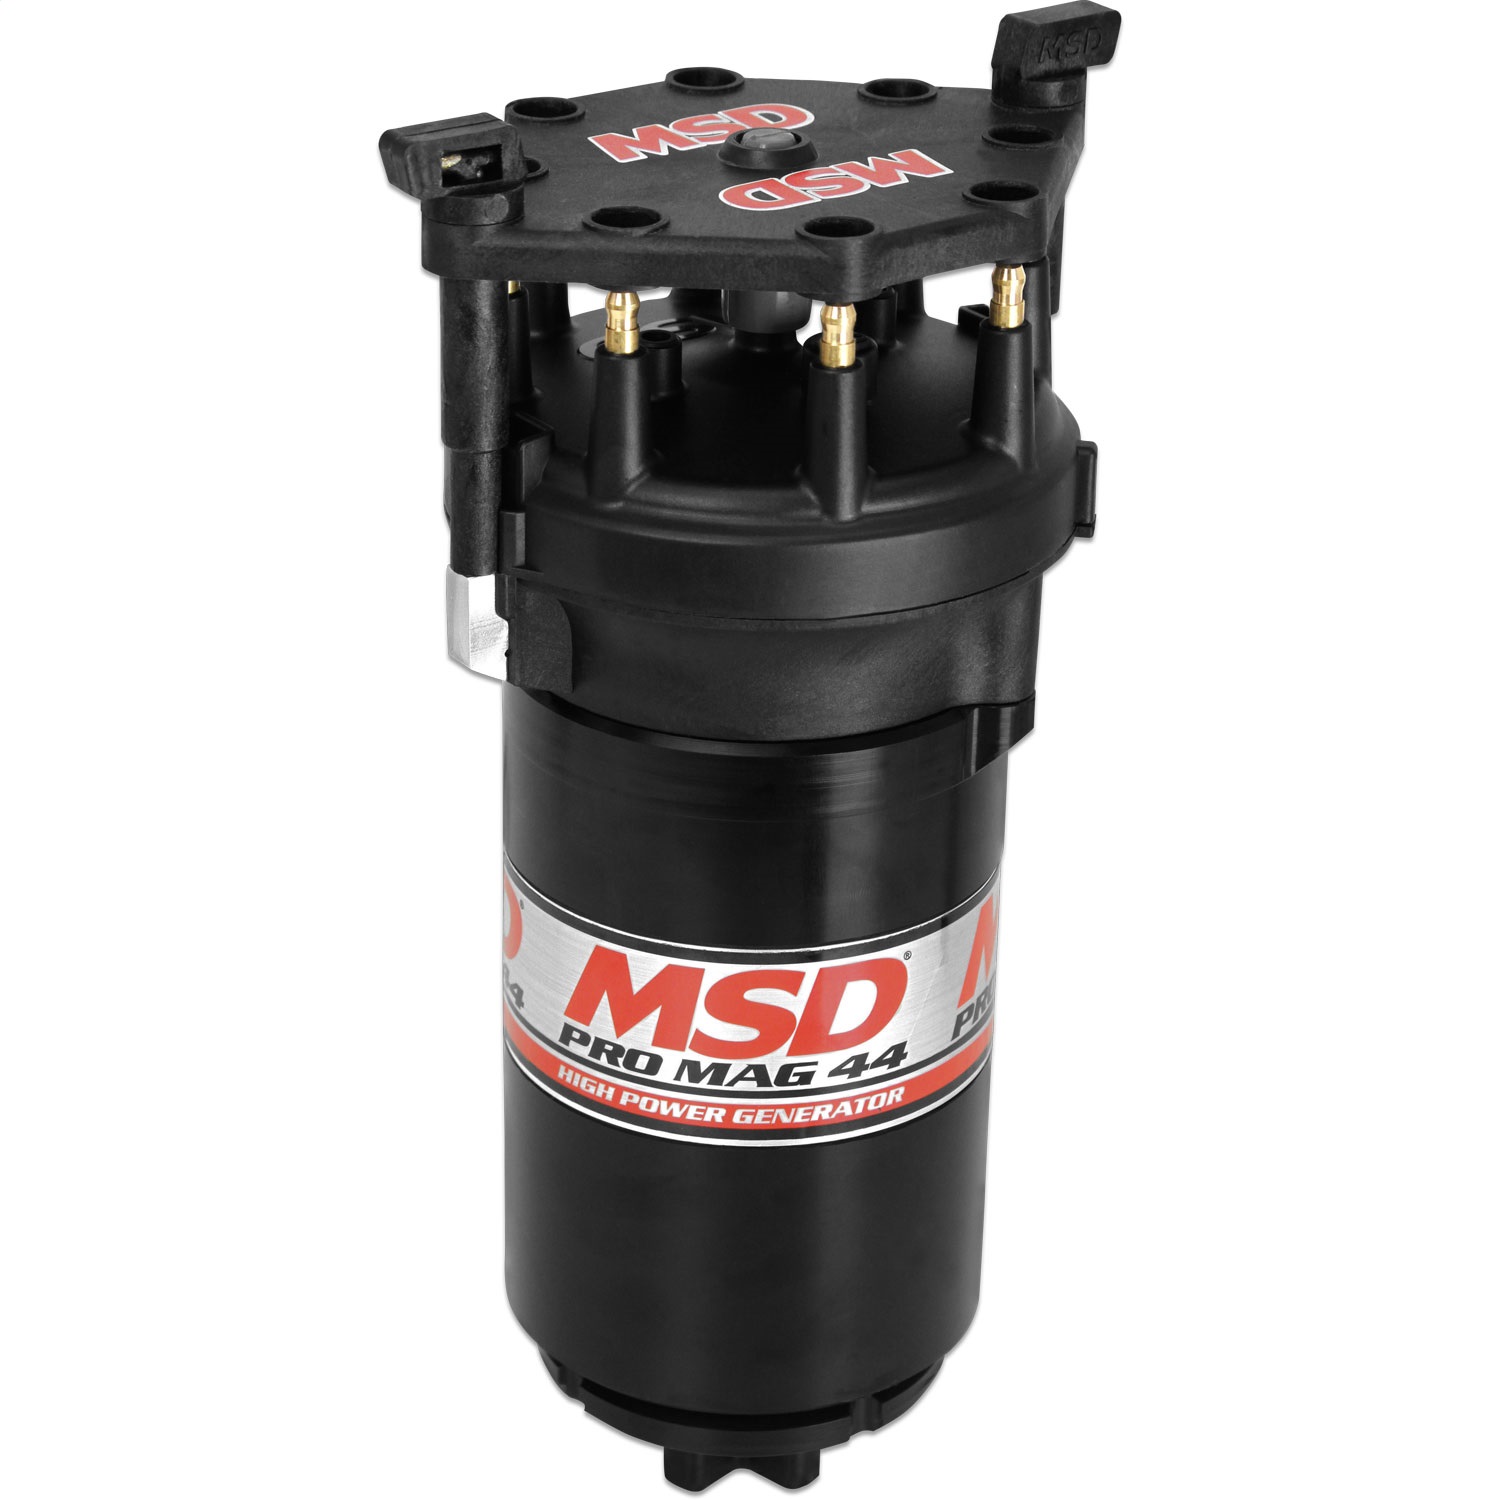 MSD Ignition MSD Ignition 81303 Pro Mag Generator